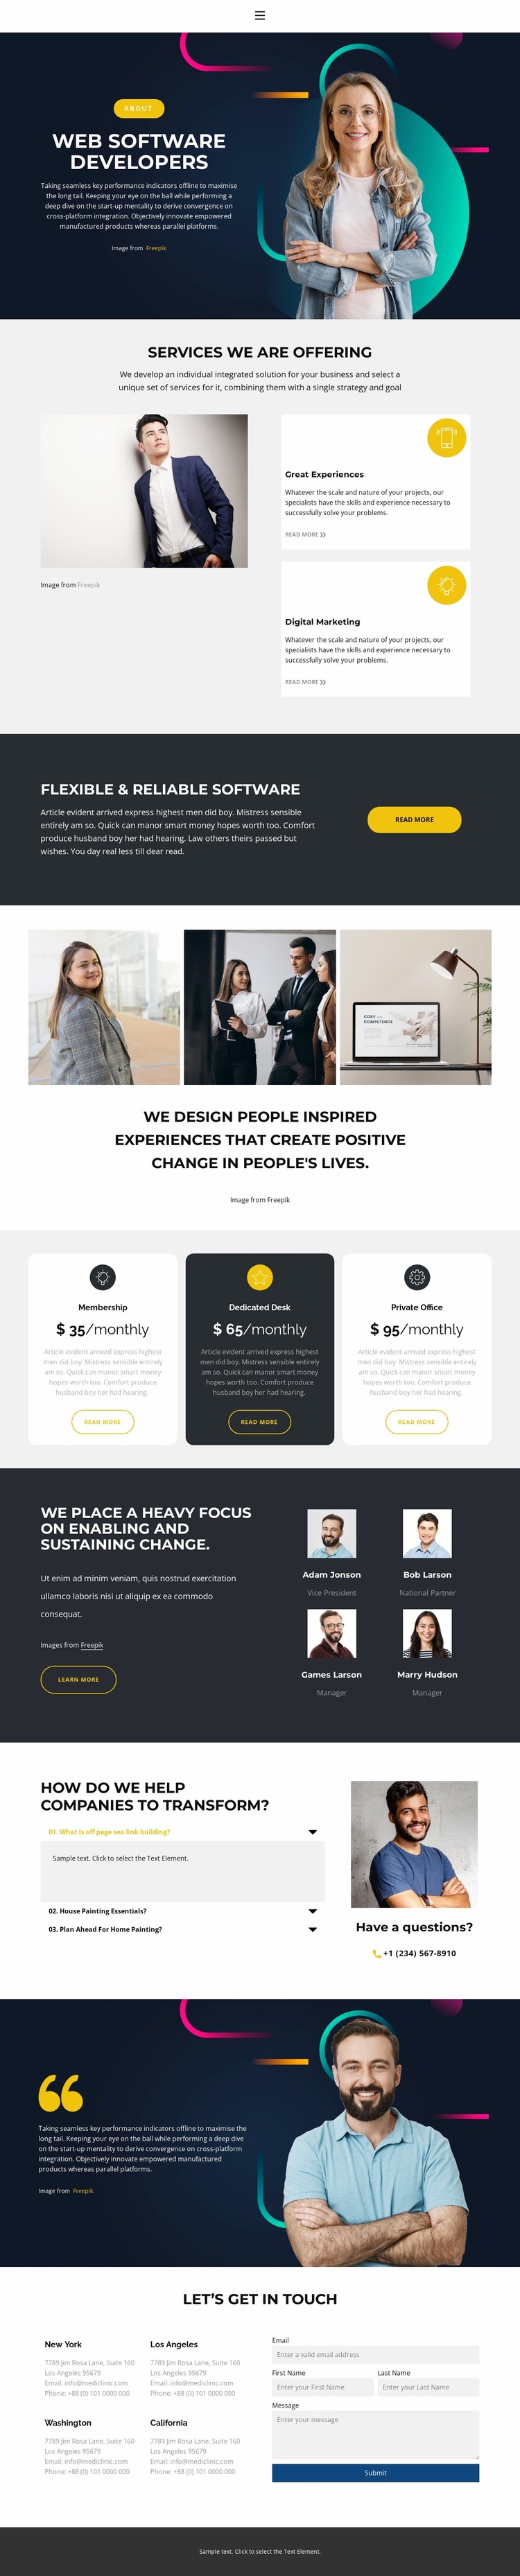 Professional and enthusiastic Website Builder Templates